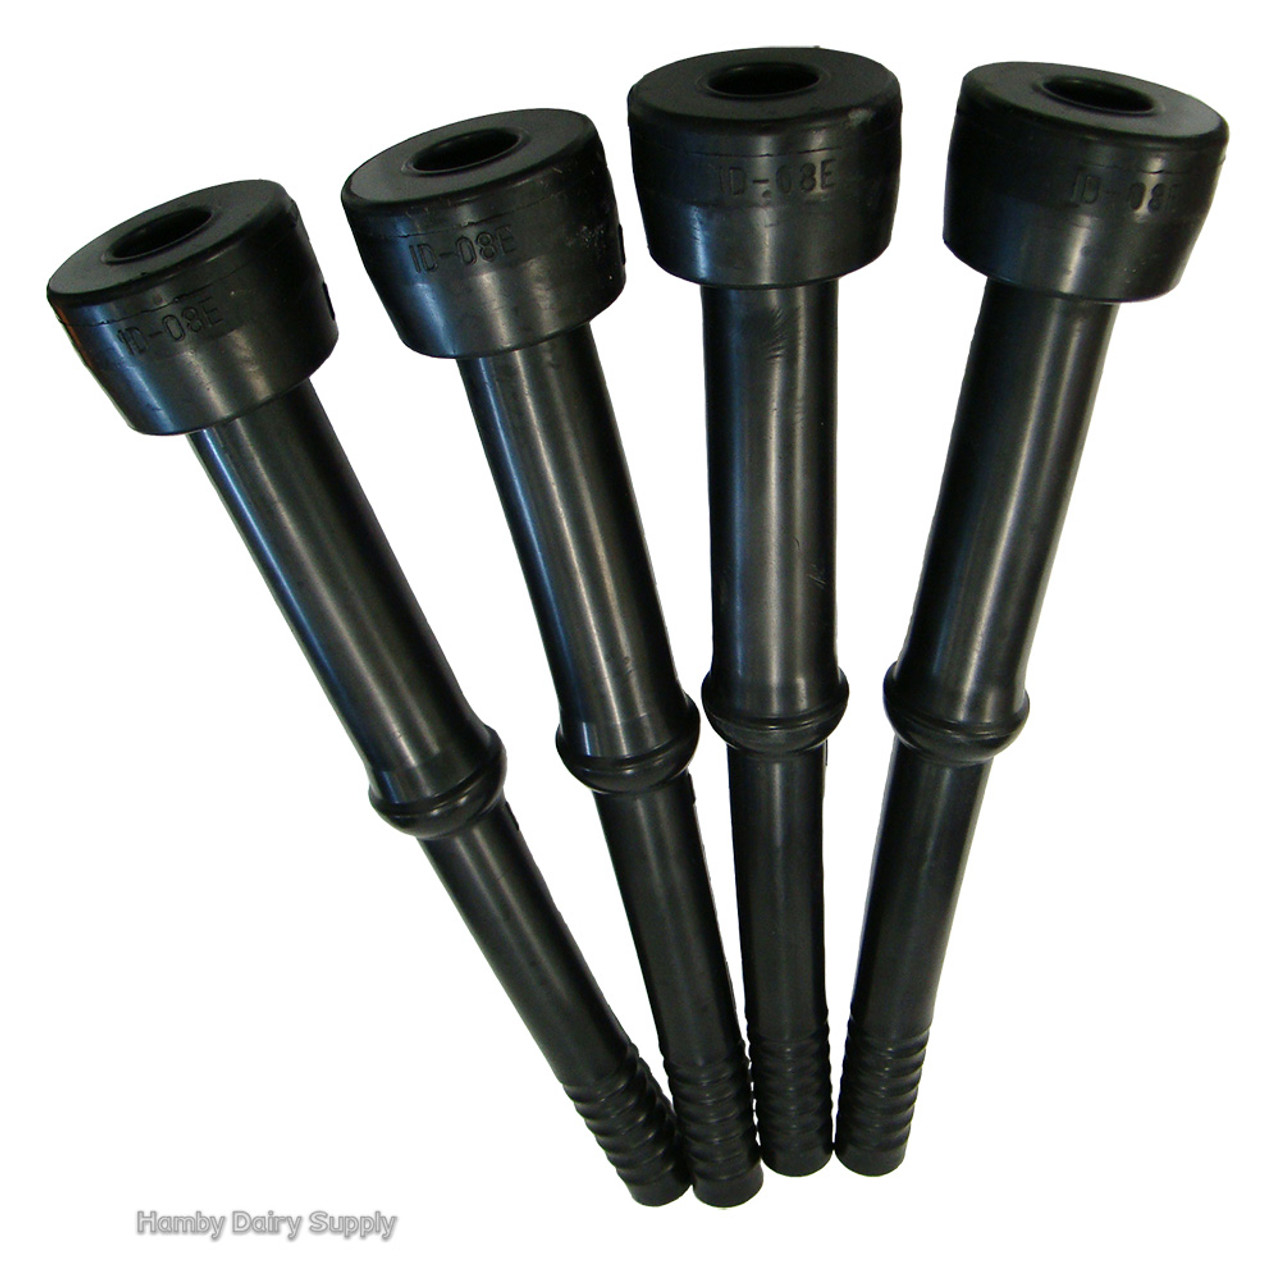 Brushes for Milking Machine - Set of 3 for liners and milk tubes